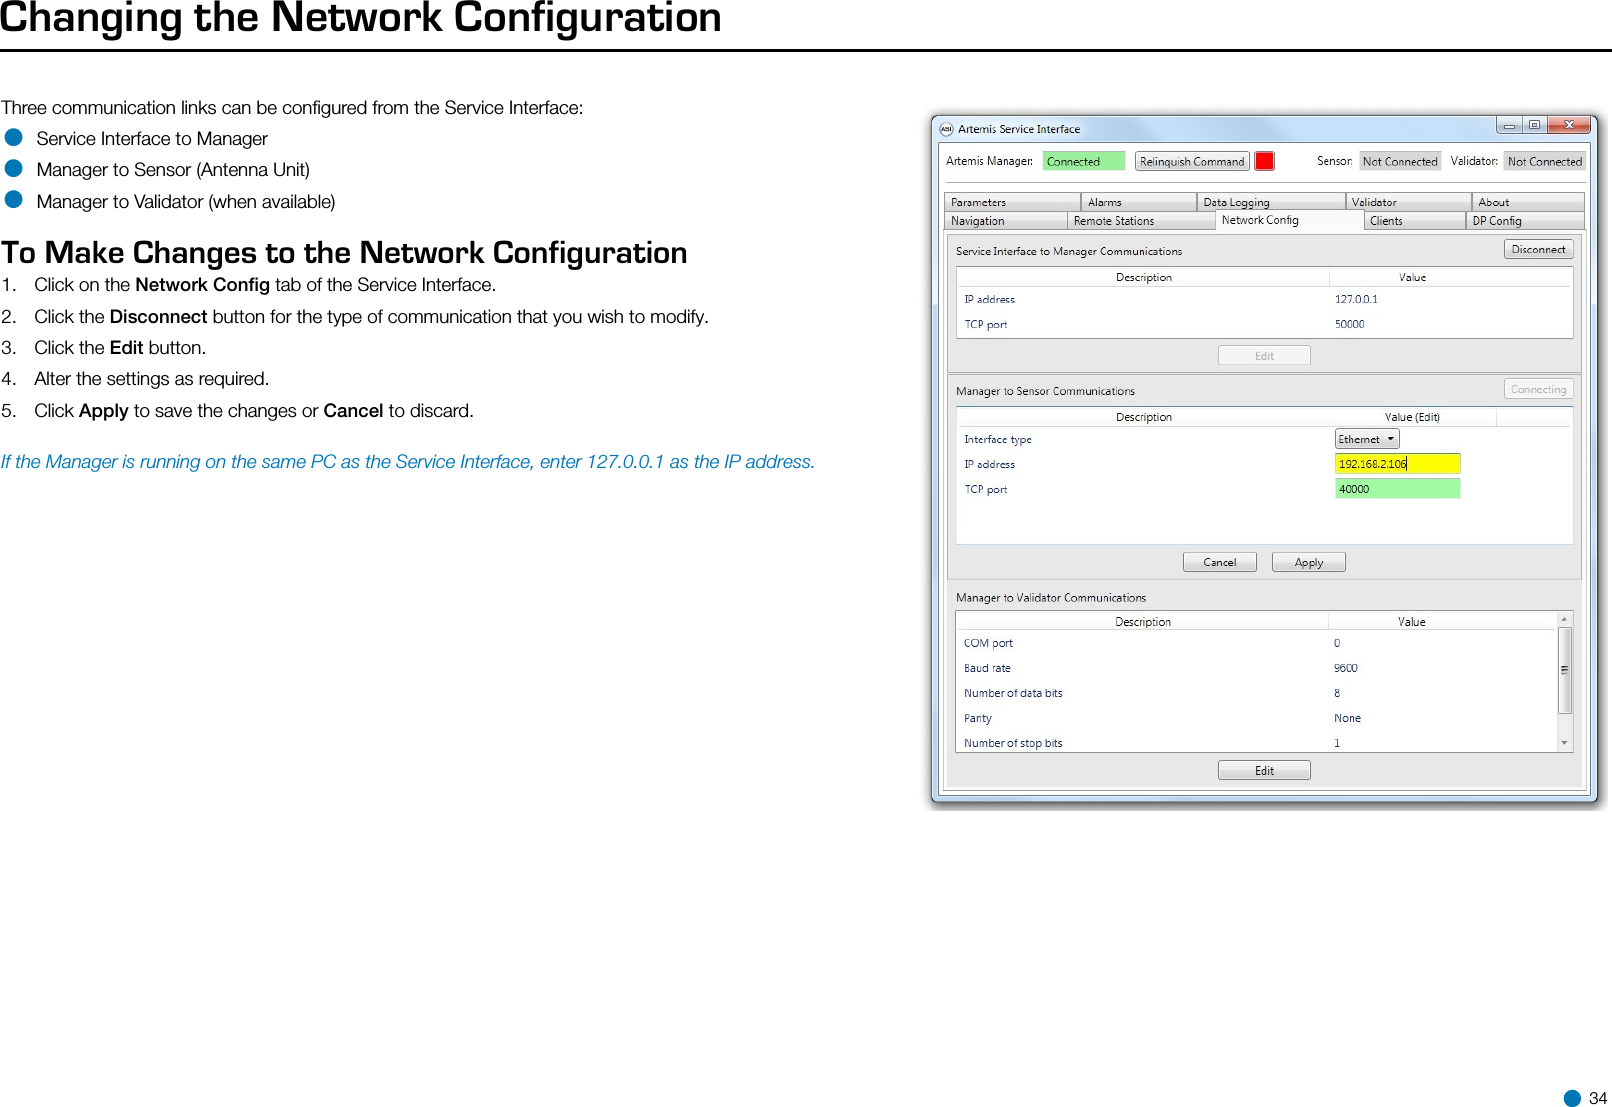 Changing the Network ConfigurationThree communication links can be conﬁgured from the Service Interface:• Service Interface to Manager• Manager to Sensor (Antenna Unit)• Manager to Validator (when available)  To Make Changes to the Network Configuration  1.  Click on the Network Conﬁg tab of the Service Interface.2.  Click the Disconnect button for the type of communication that you wish to modify.3.  Click the Edit button.4.  Alter the settings as required.5.  Click Apply to save the changes or Cancel to discard. If the Manager is running on the same PC as the Service Interface, enter 127.0.0.1 as the IP address. 34